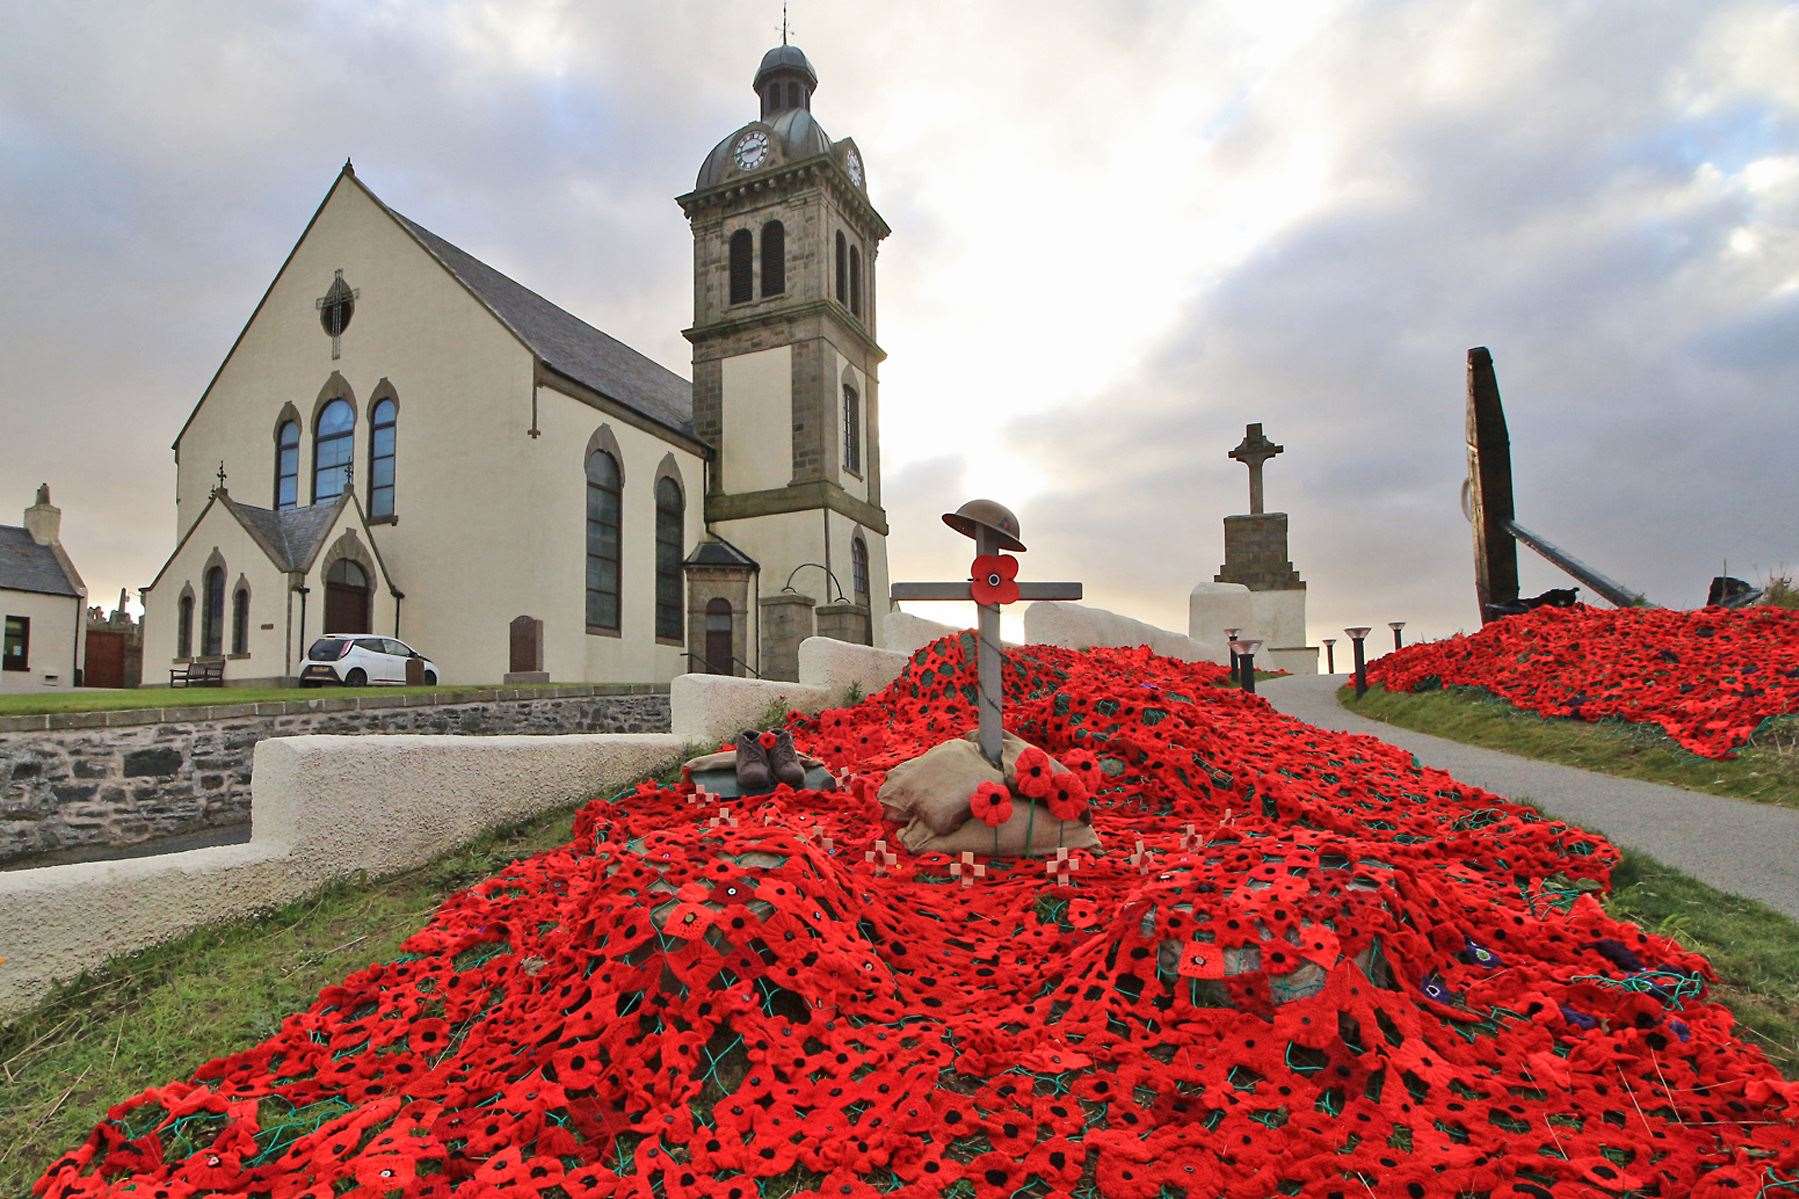 Macduff's tribute for Remembrance is a cascade of poppies in front of the Parish Church at the town cross and anchor, which includes a soldier's helmet on a cross and knitted boots. Picture: Andrew Taylor